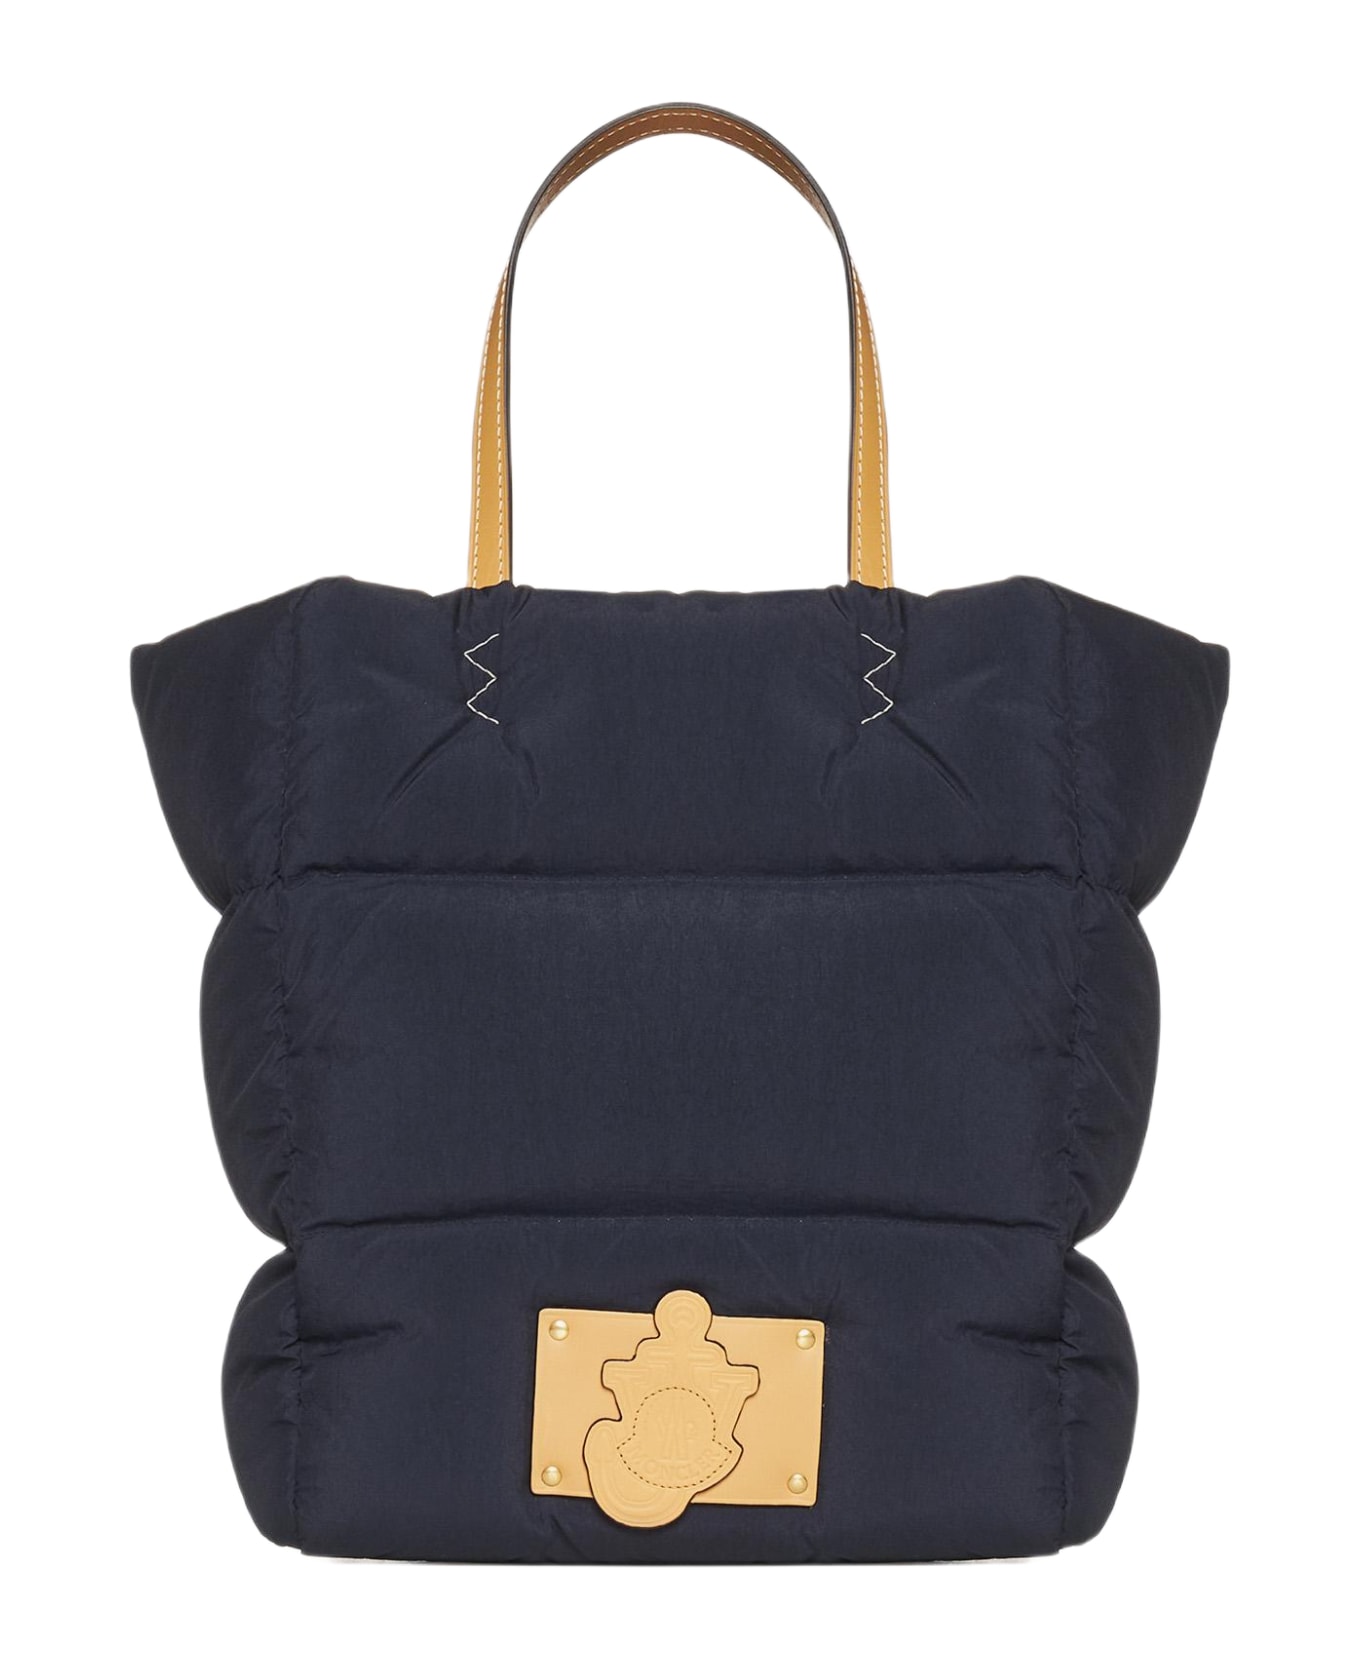 Moncler Genius Nylon And Leather Tote Bag - BLUE